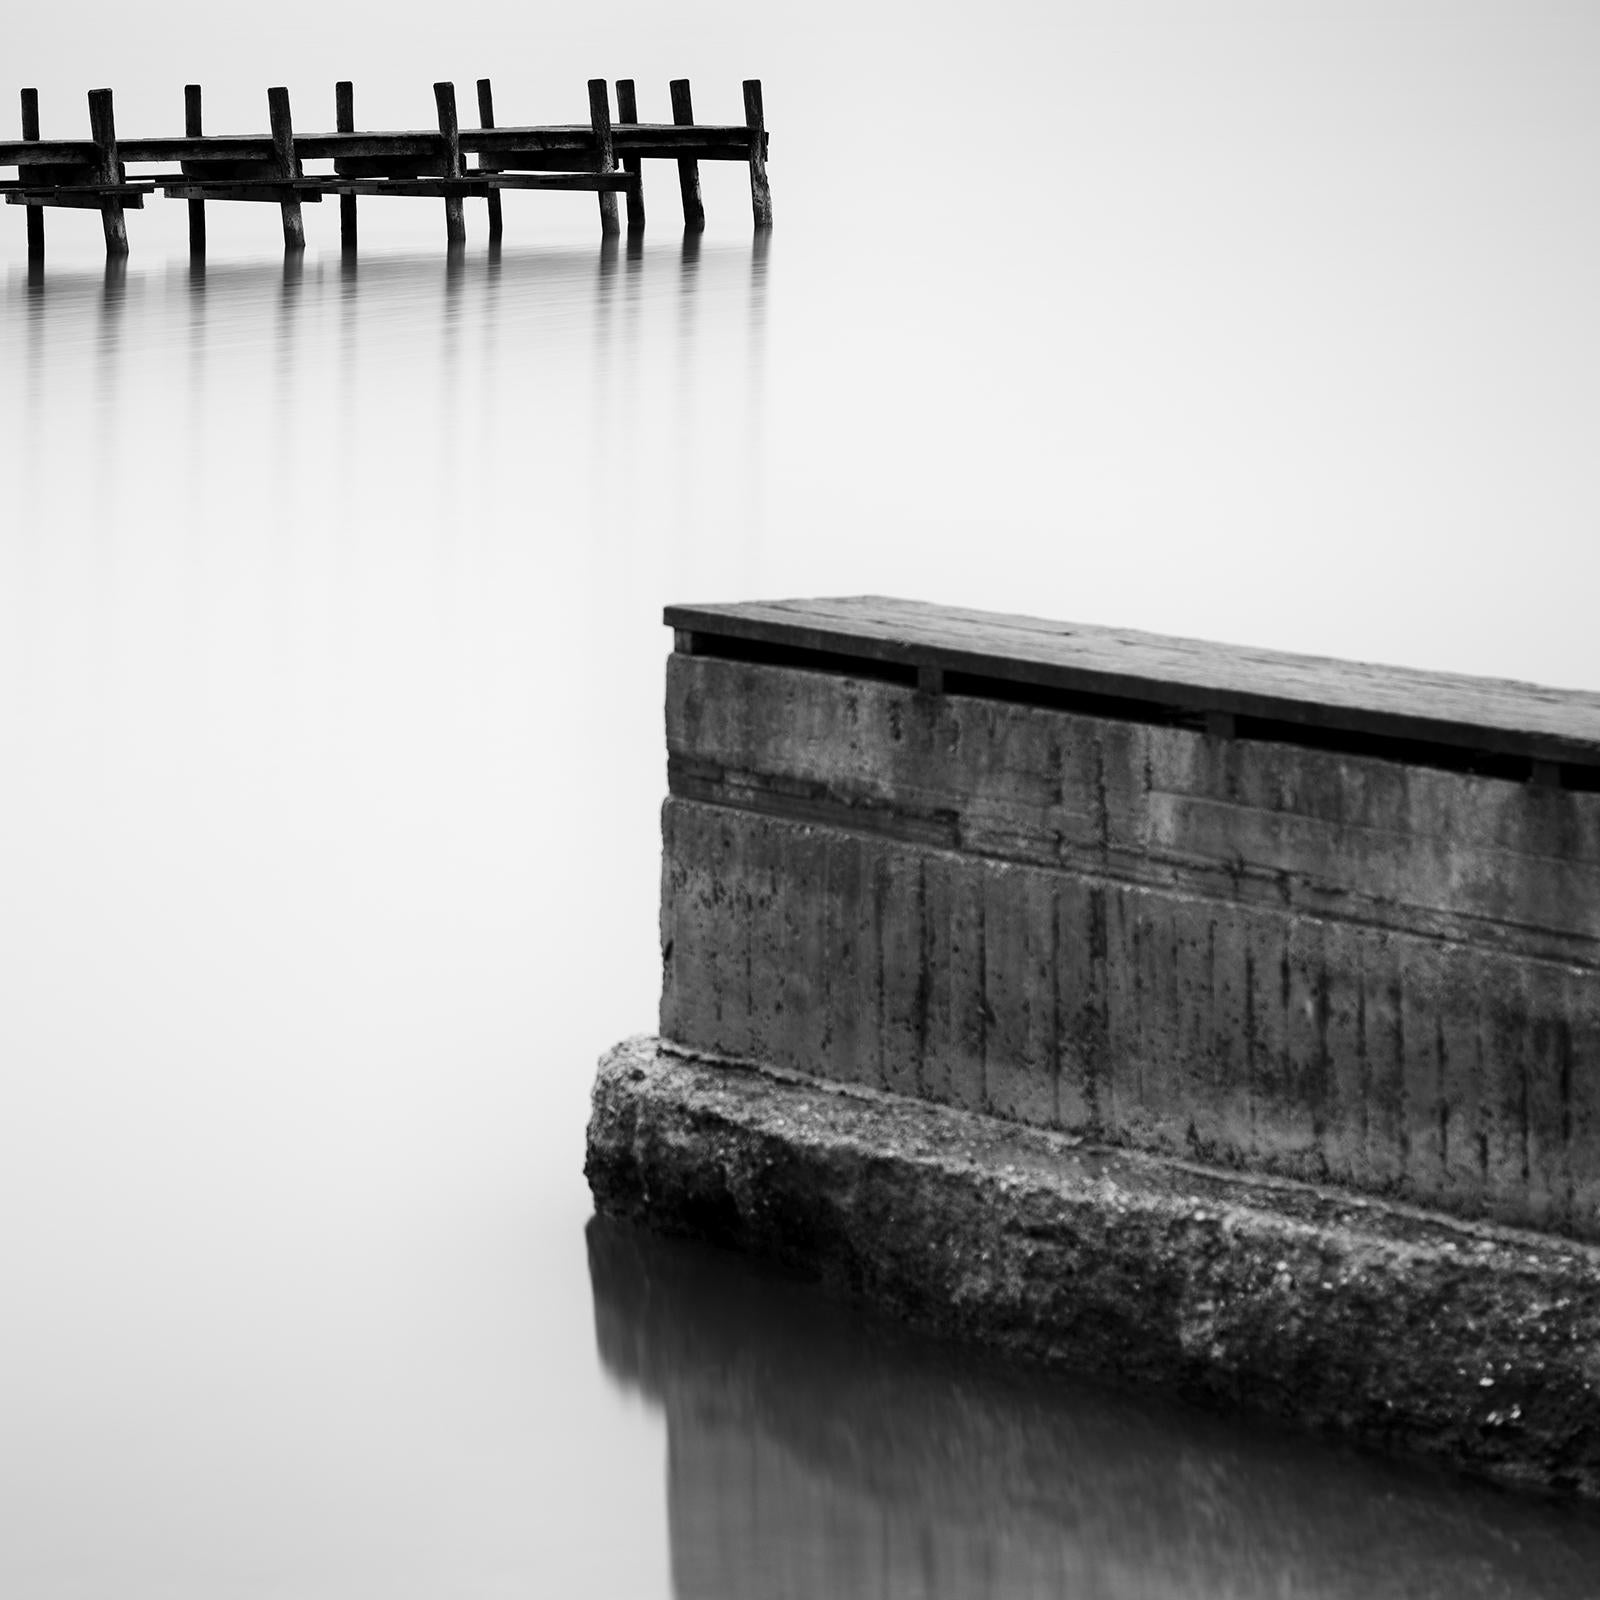 Misty morning on the Lake, Jetty, Pier, black and white photography, landscape For Sale 6